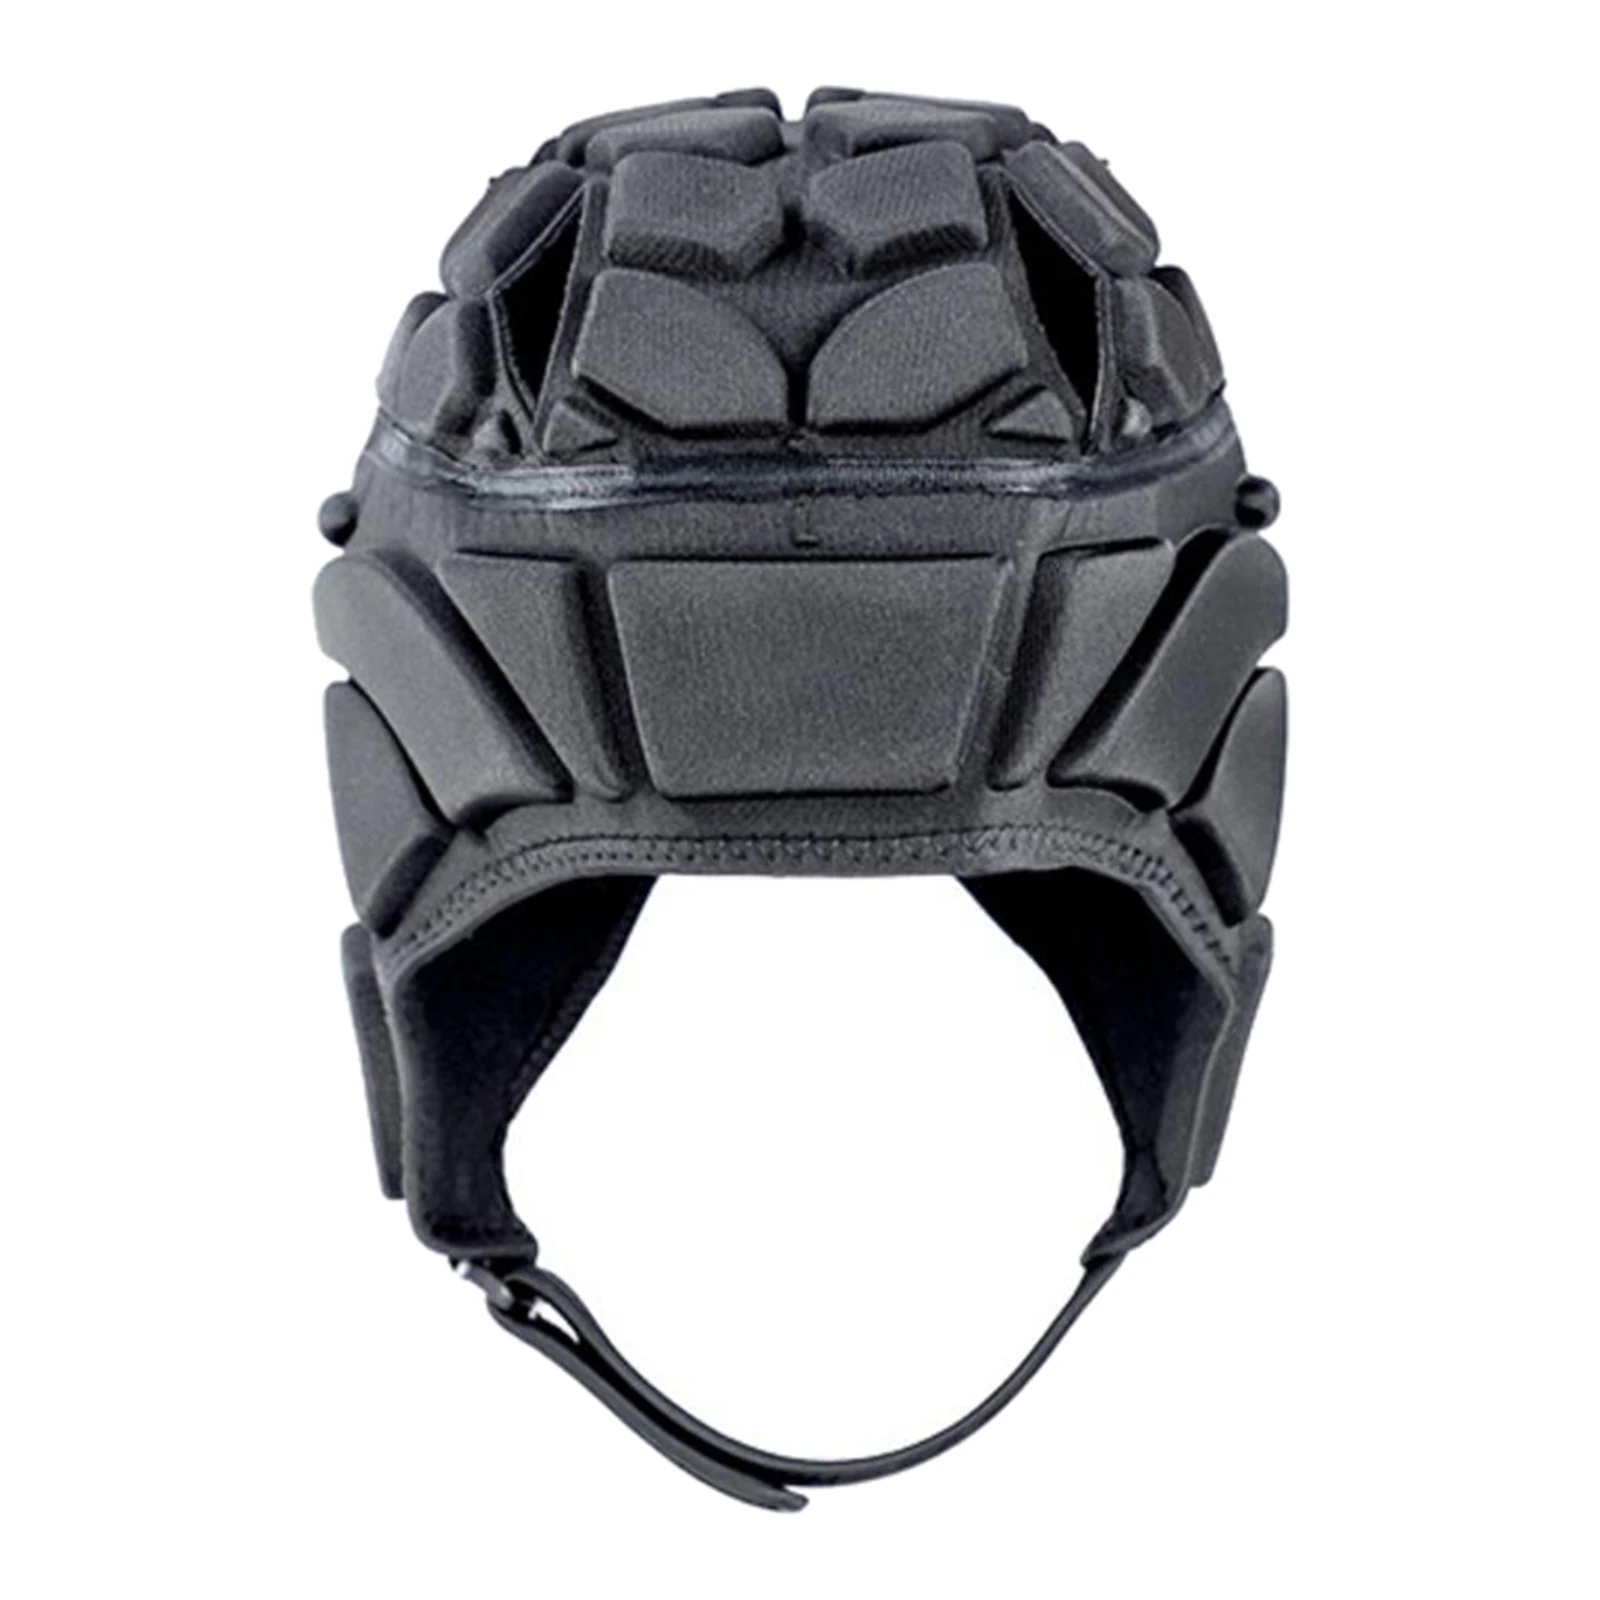 Lacrosse Tongina Lightweight Soft Shell Rugby Helmet Two-Way Adjustable Padded Compression Scrum Cap Hat Headgear for Football Hockey 